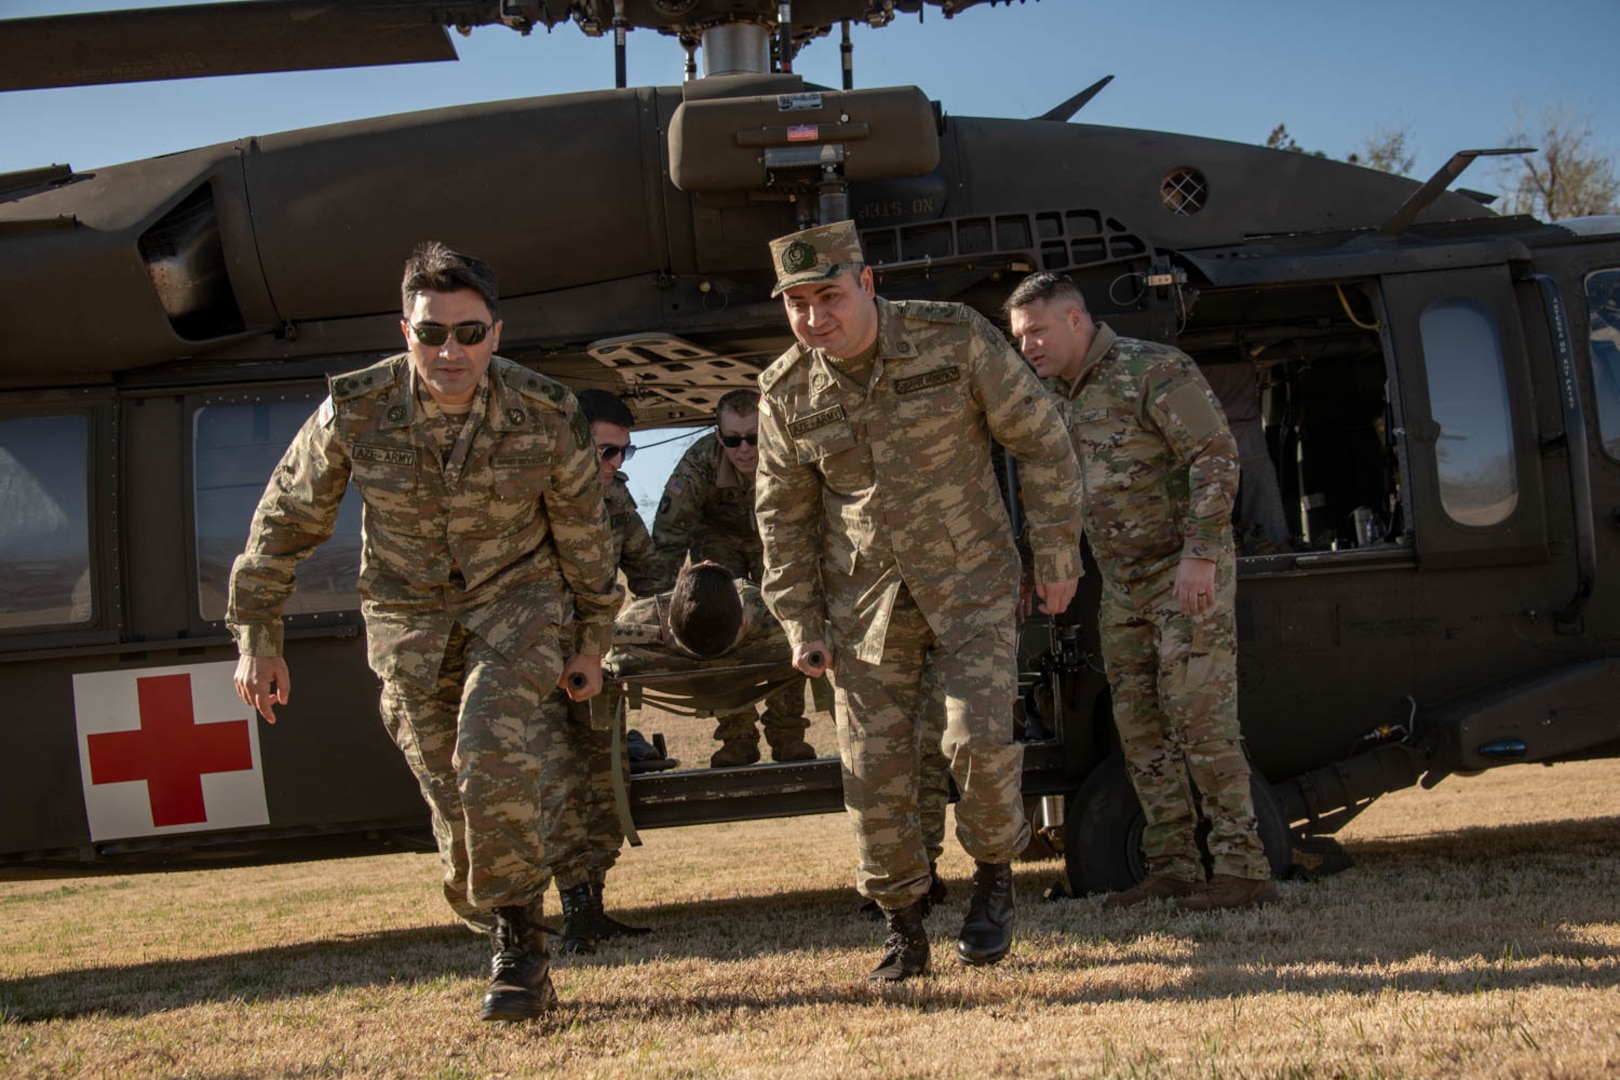 Oklahoma Army National Guard Soldiers and doctors with the Azerbaijan Operational Capabilities Concept Battalion evacuate a simulated patient from a UH-60 Black Hawk helicopter during a medical knowledge exchange in Oklahoma City, April 1, 2022. The Oklahoma Army and Air National Guard participated in support of the Department of Defense National Guard Bureau State Partnership Program.